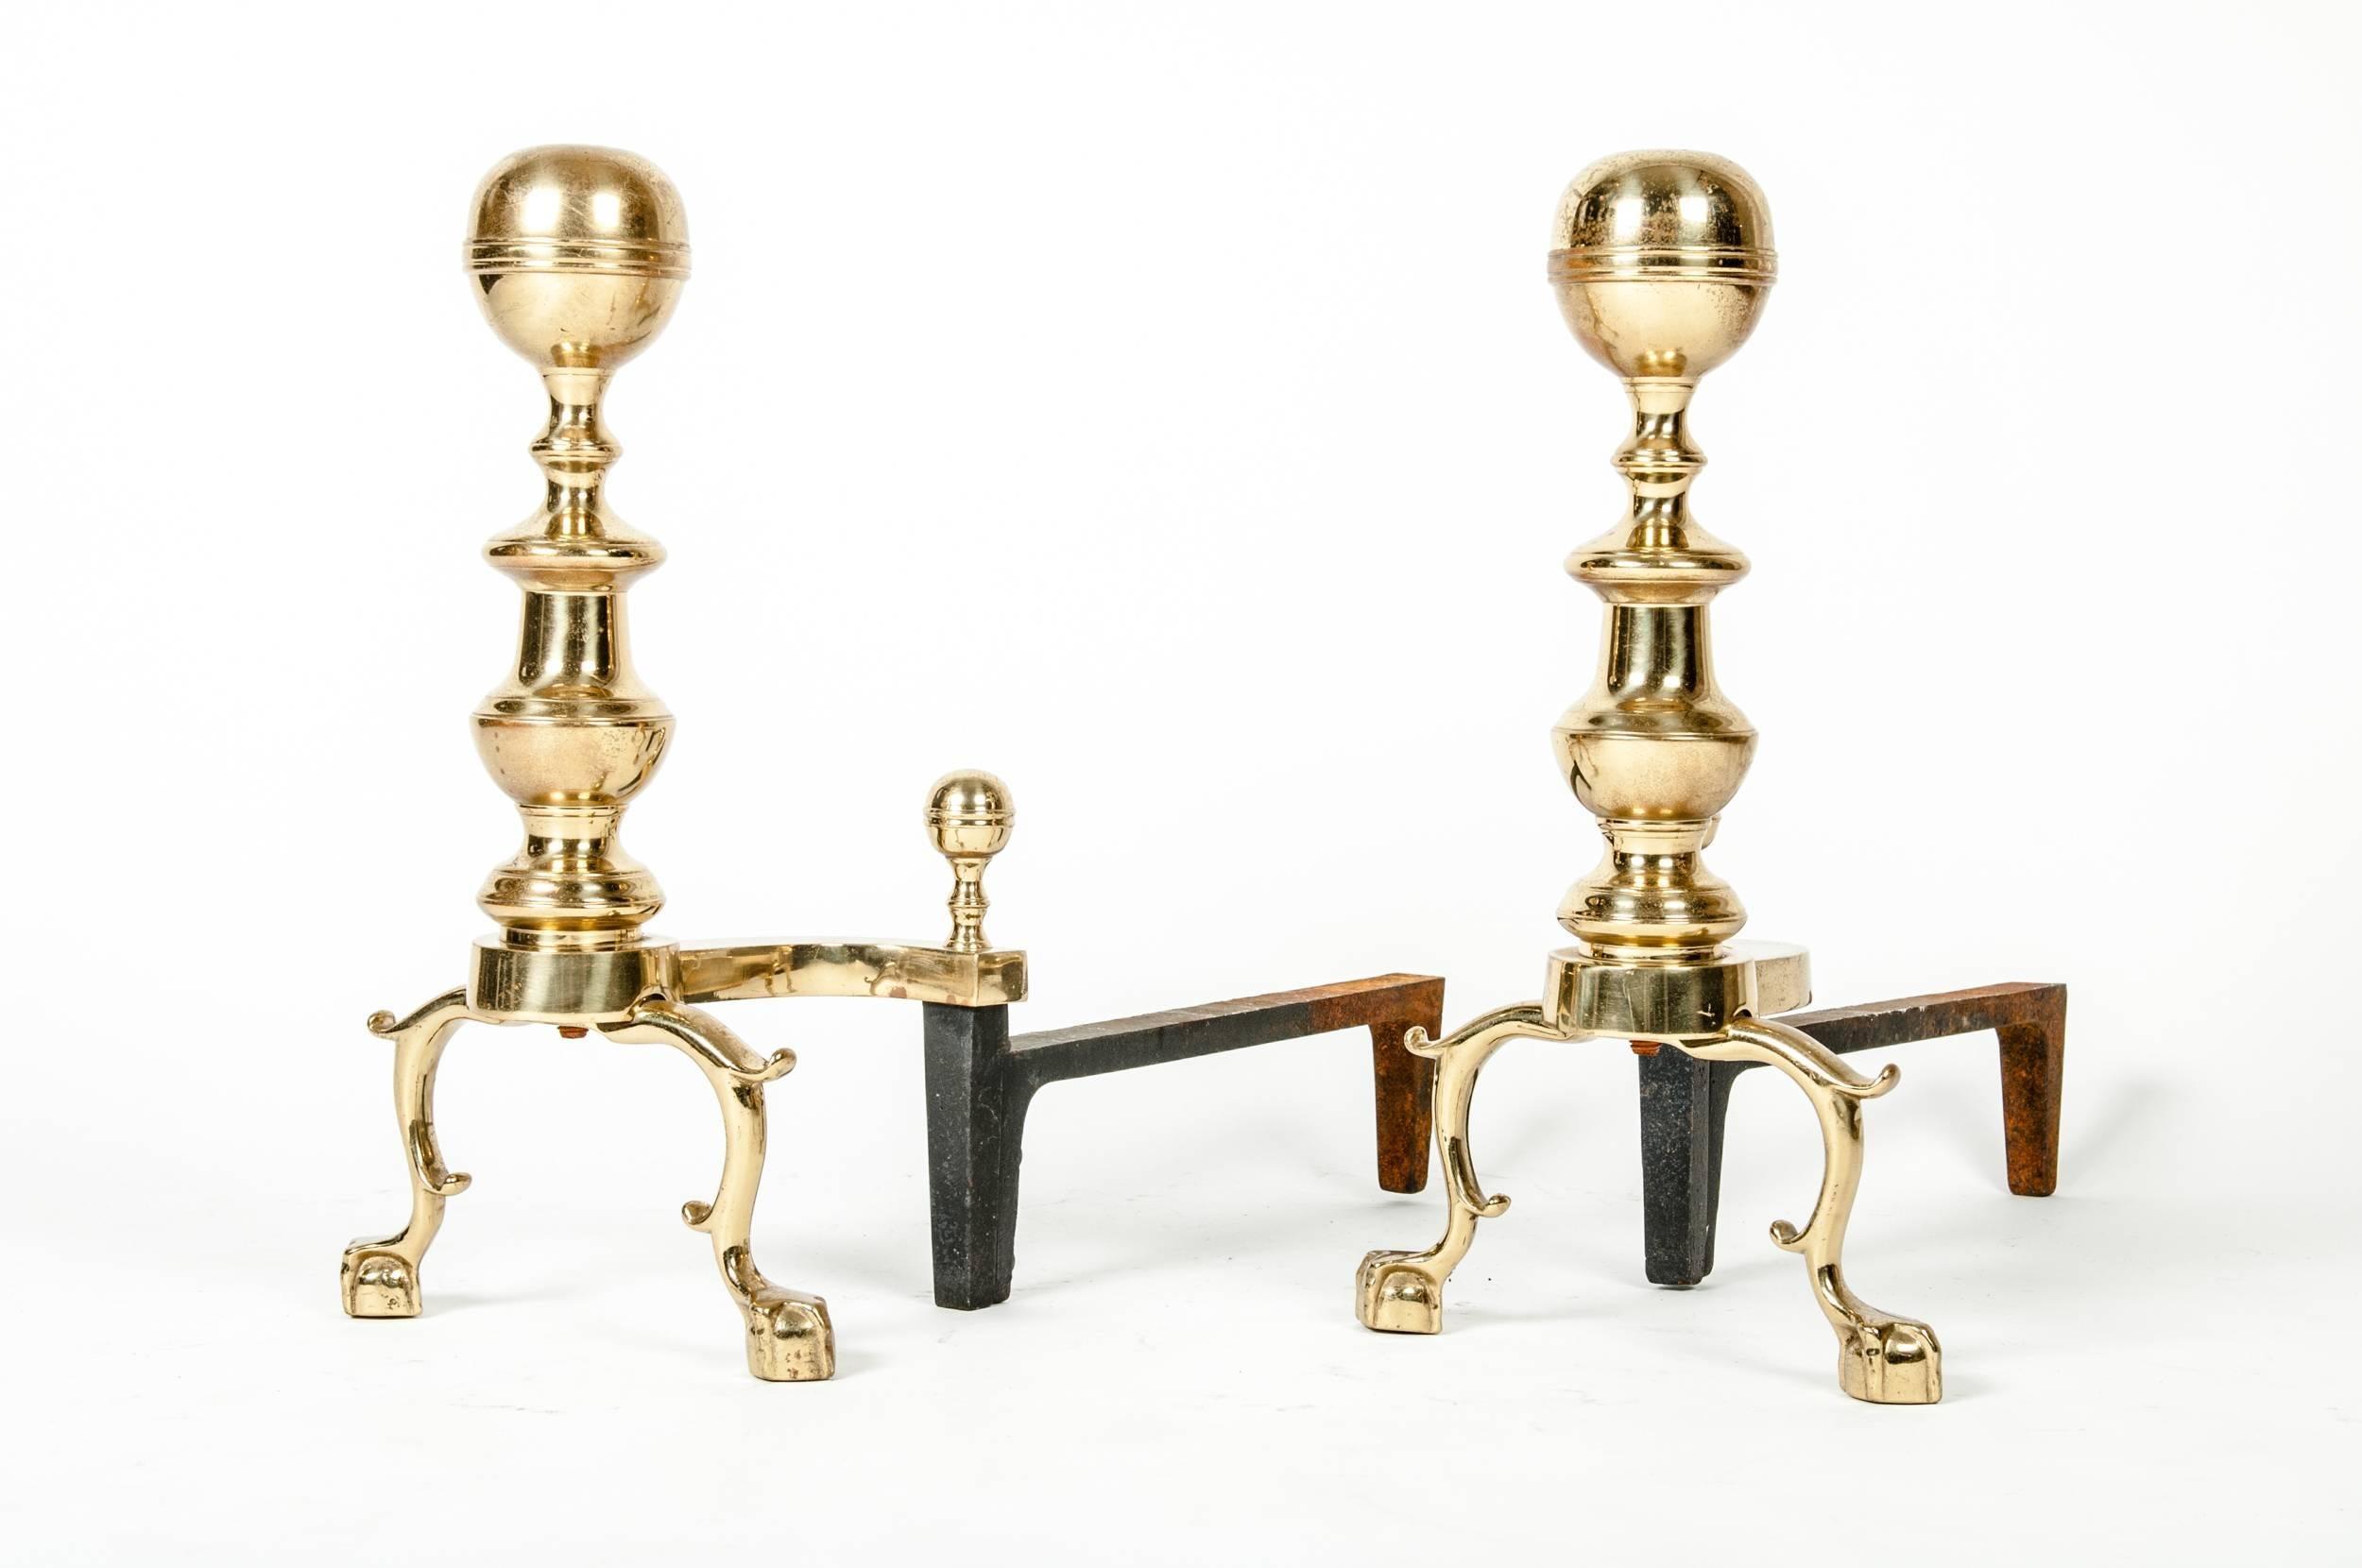 Vintage pair of solid brass English andirons. Each andiron measure 17 inches high x 21 inches long.